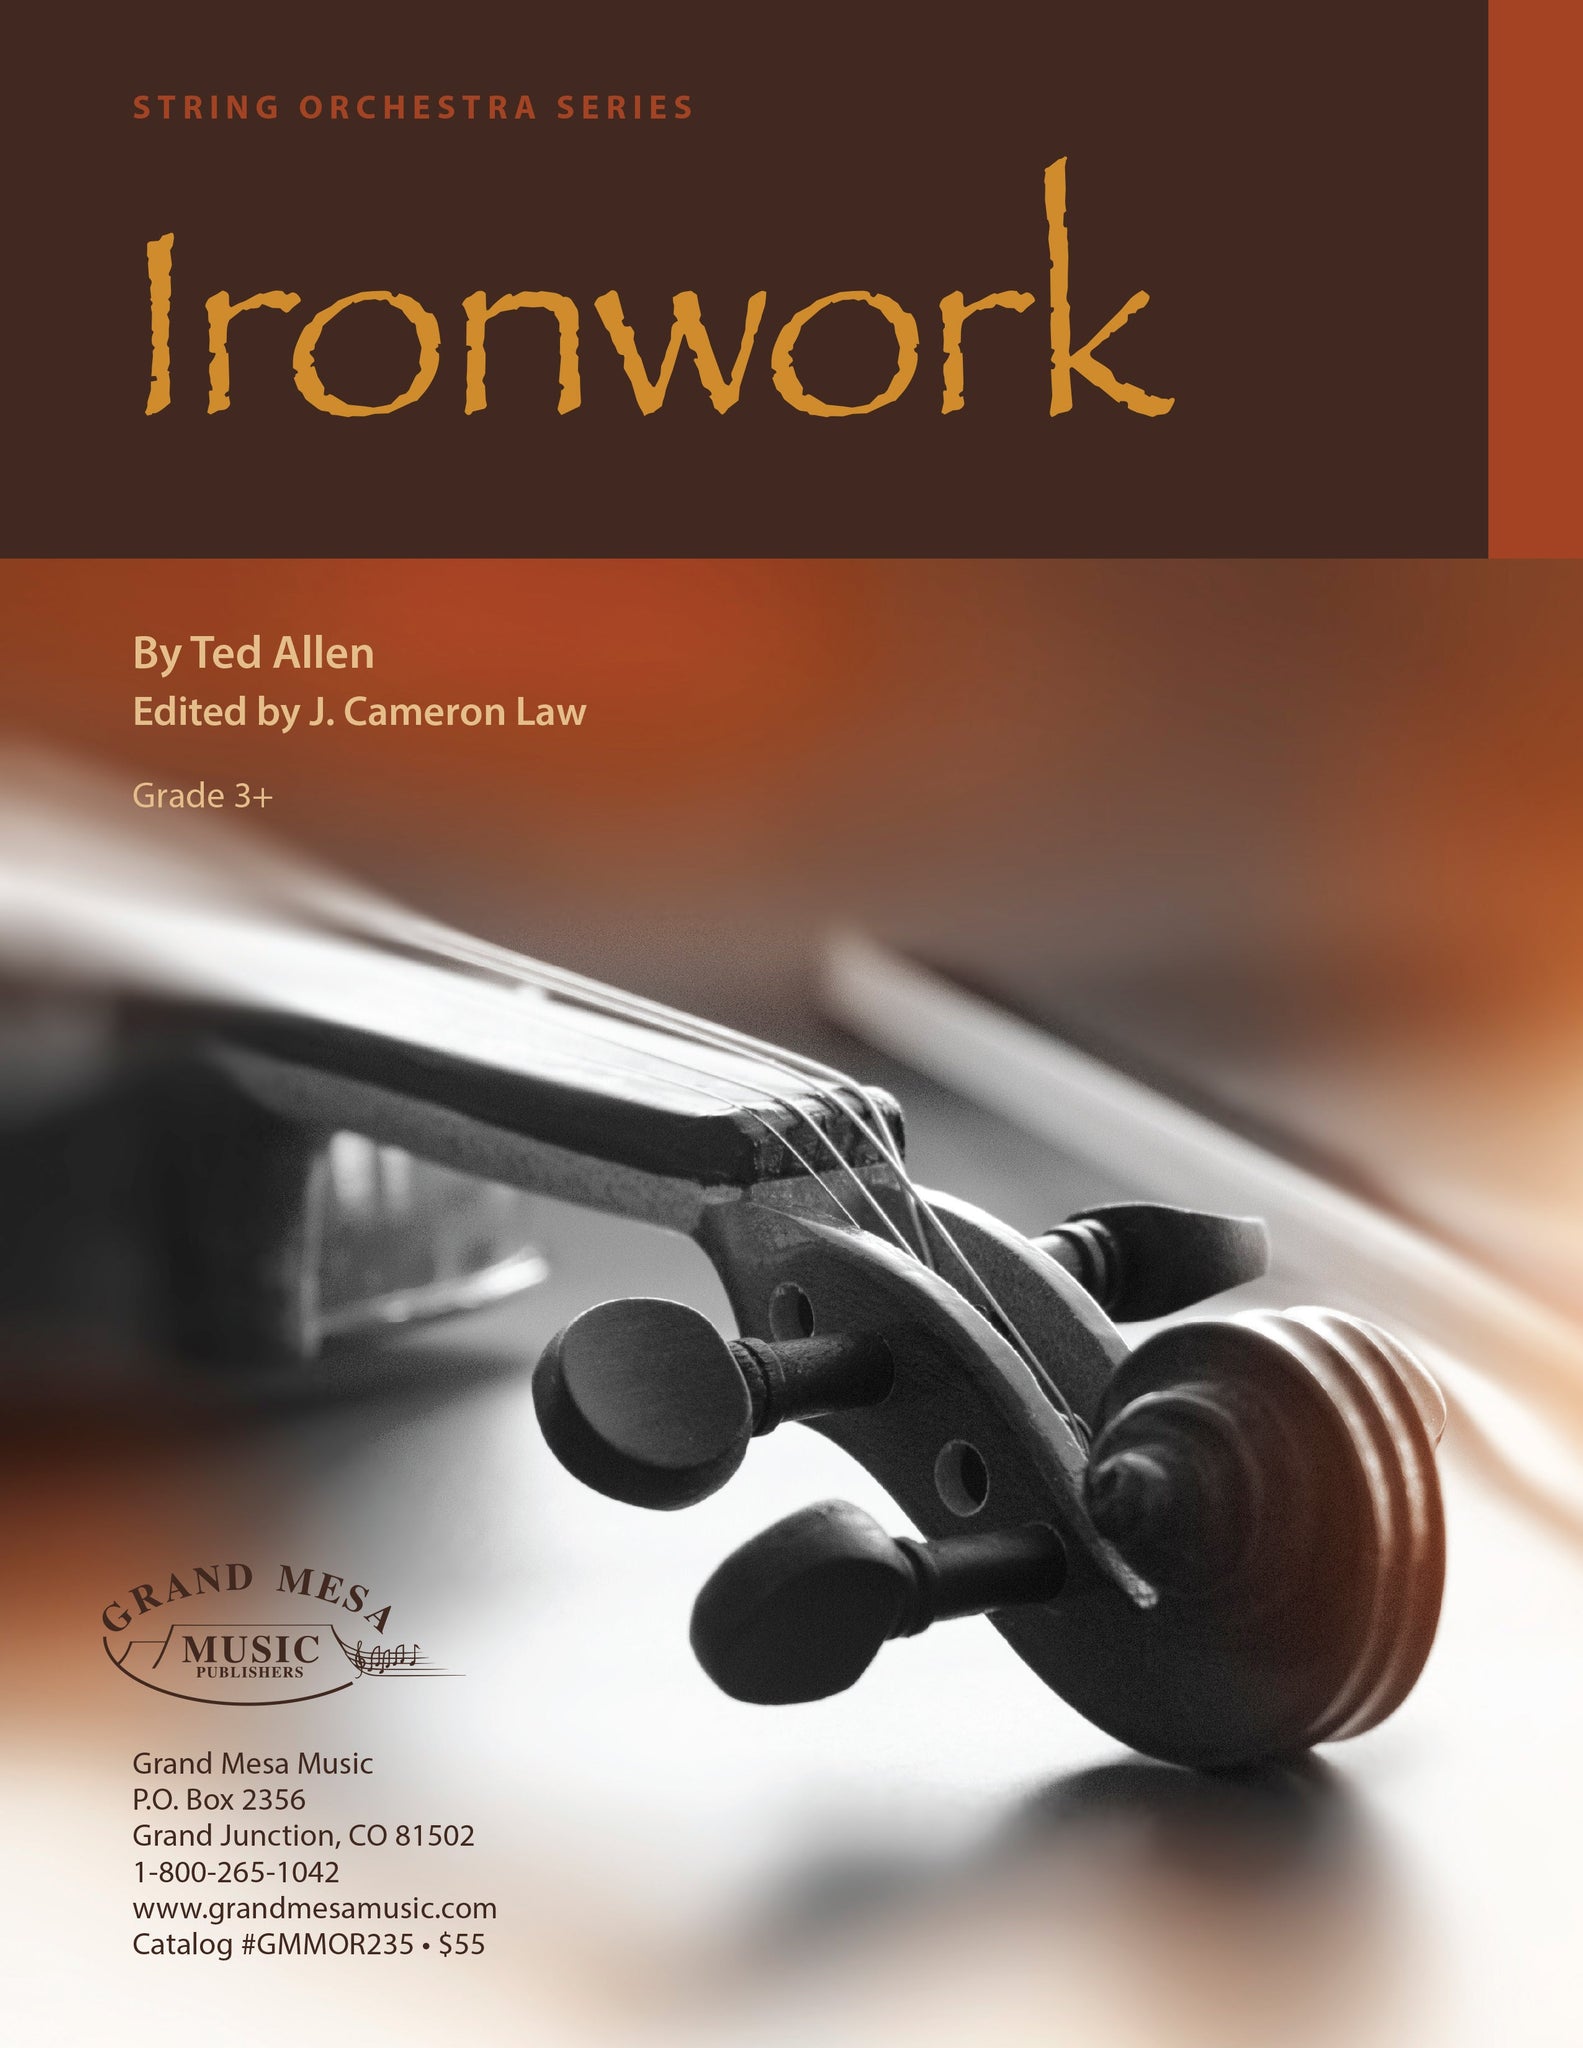 Strings sheet music cover of Ironwork, composed by Ted Allen.